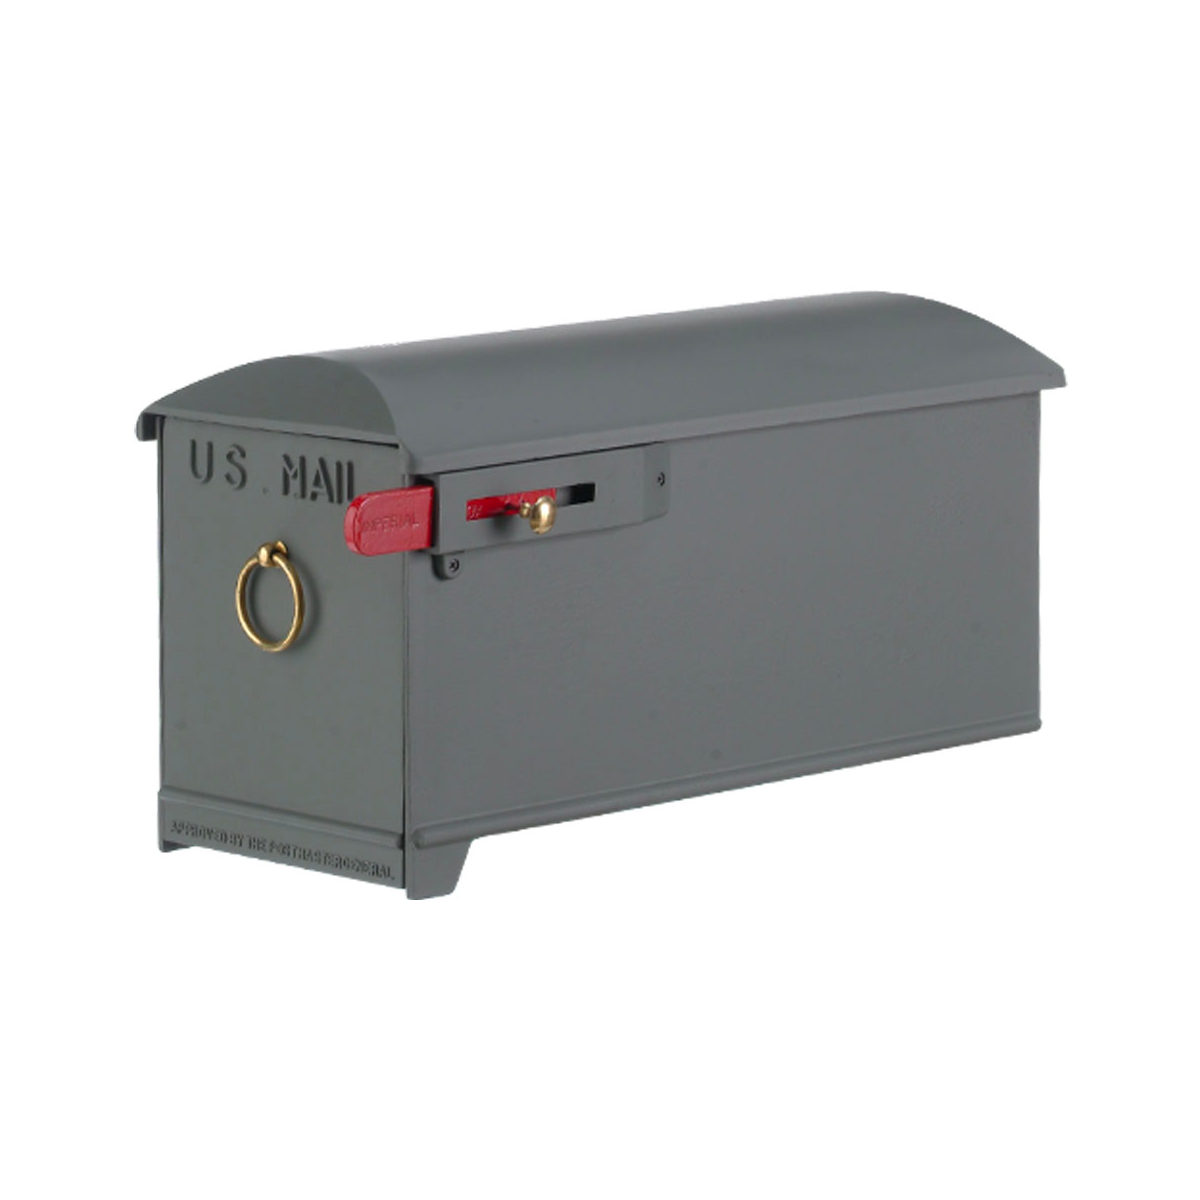 Imperial Mailbox 0 – Large Estate Box (mailbox only) Product Image